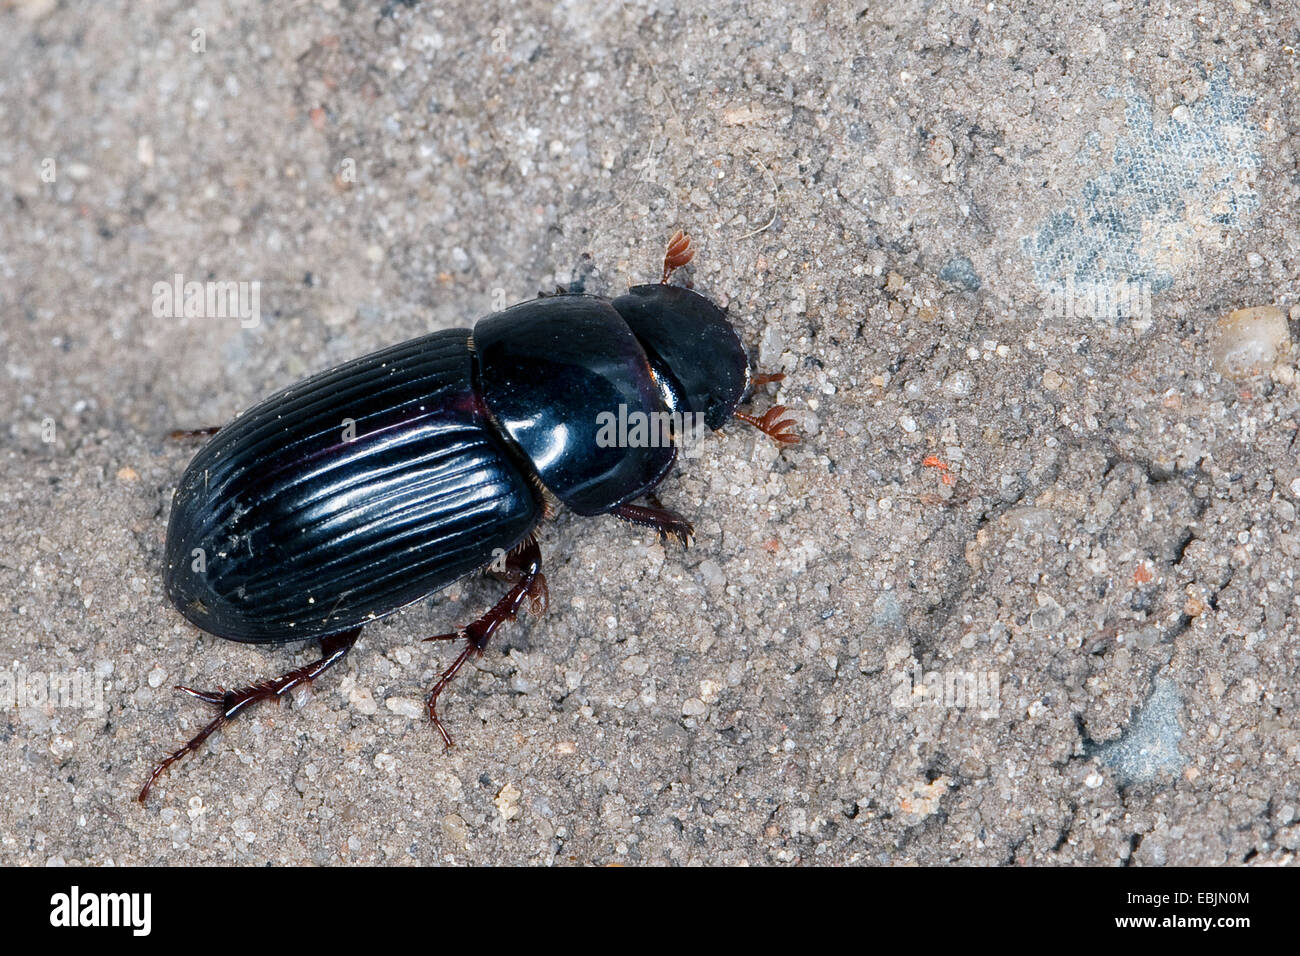 night-flying dung beetle, dung-beetle (Aphodius rufipes, Acrossus rufipes), on the ground, Germany Stock Photo